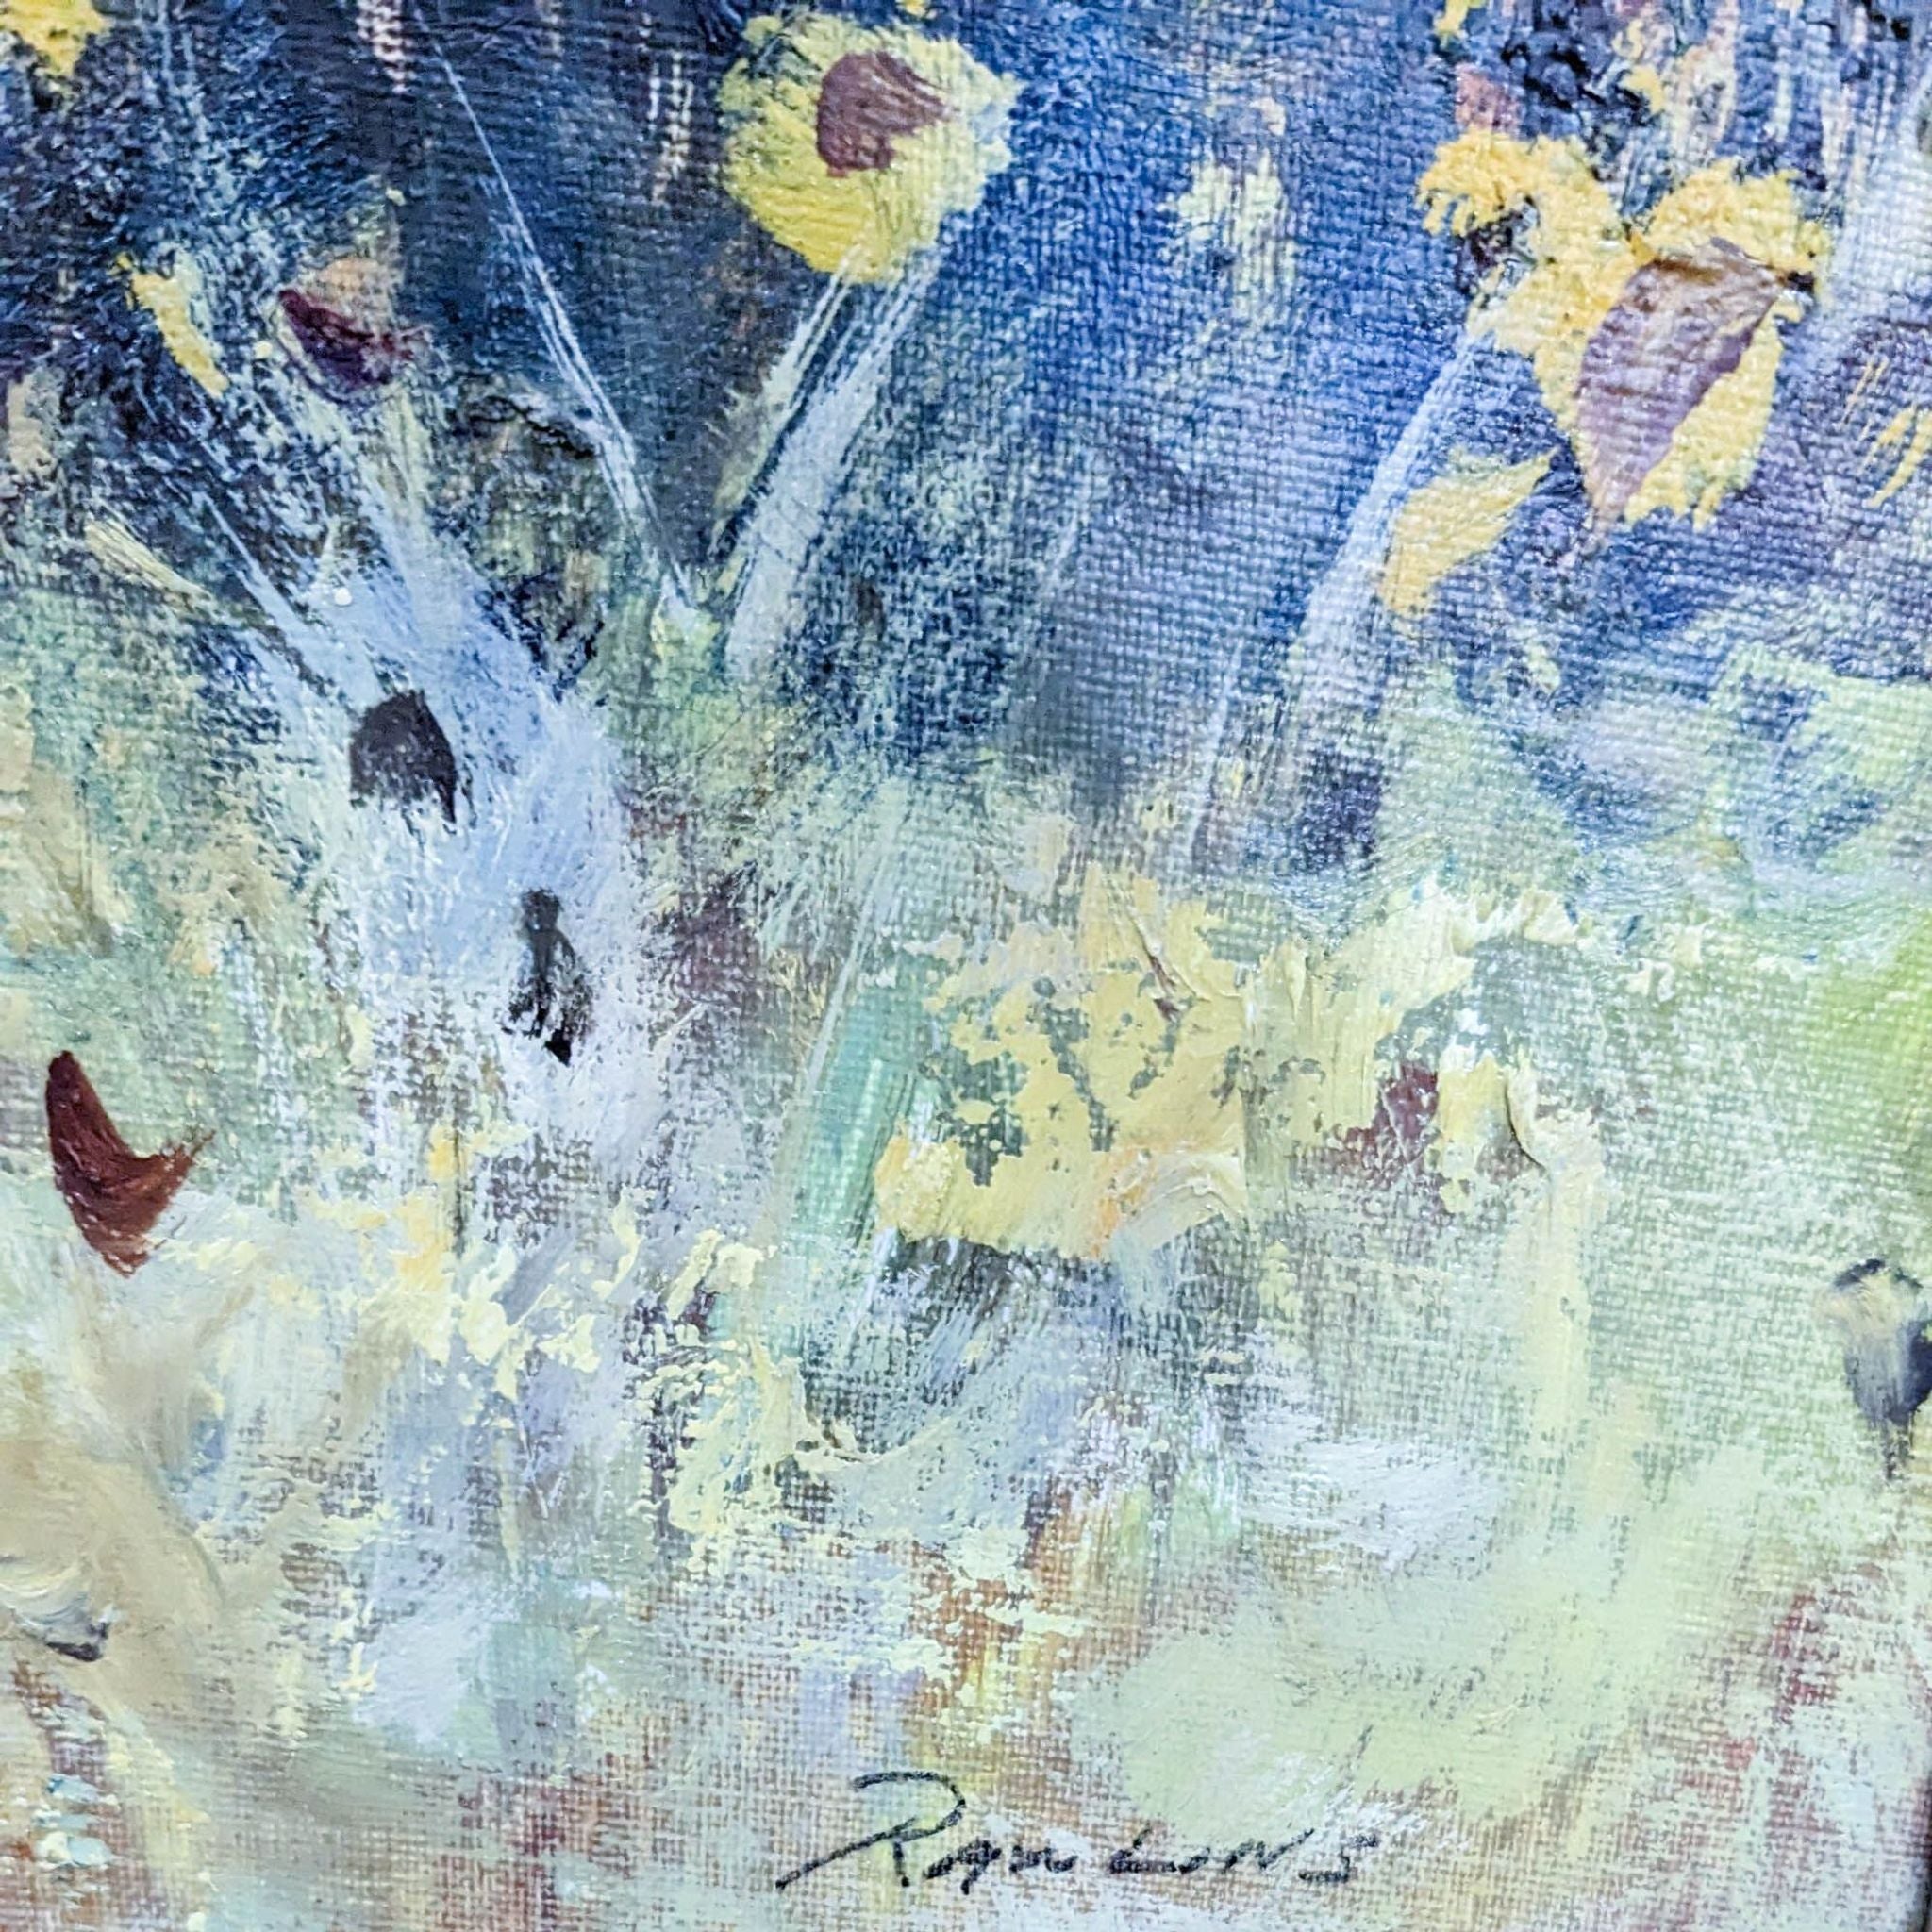 Close-up of a painting's texture and artist's signature, "Reperch," in a colorful garden scene.